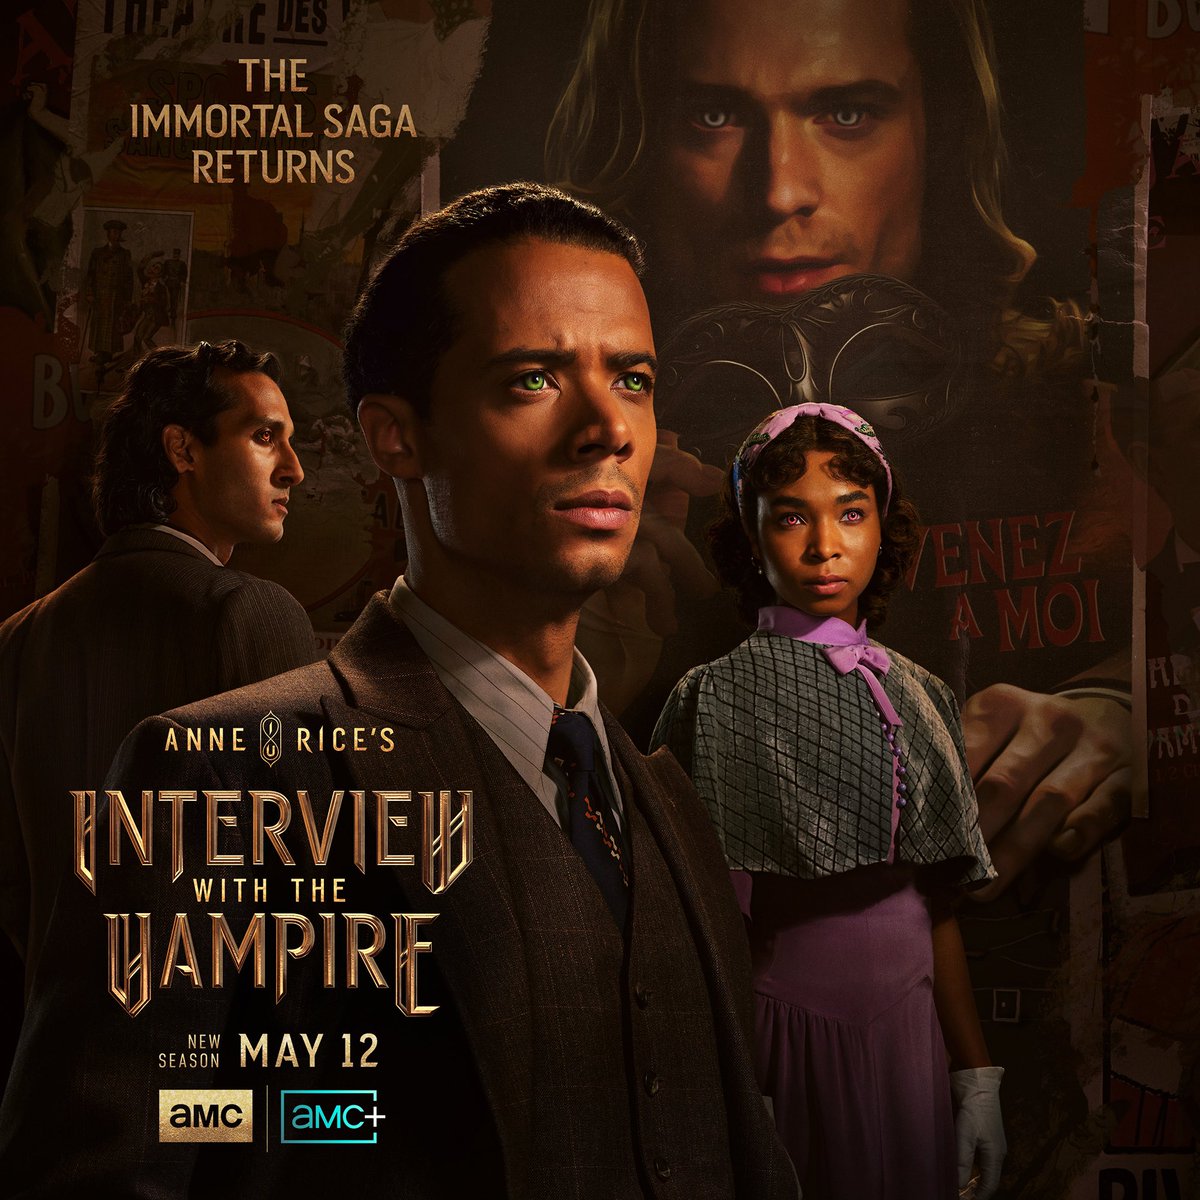 The poster for ‘INTERVIEW WITH THE VAMPIRE’ season 2 has been released.